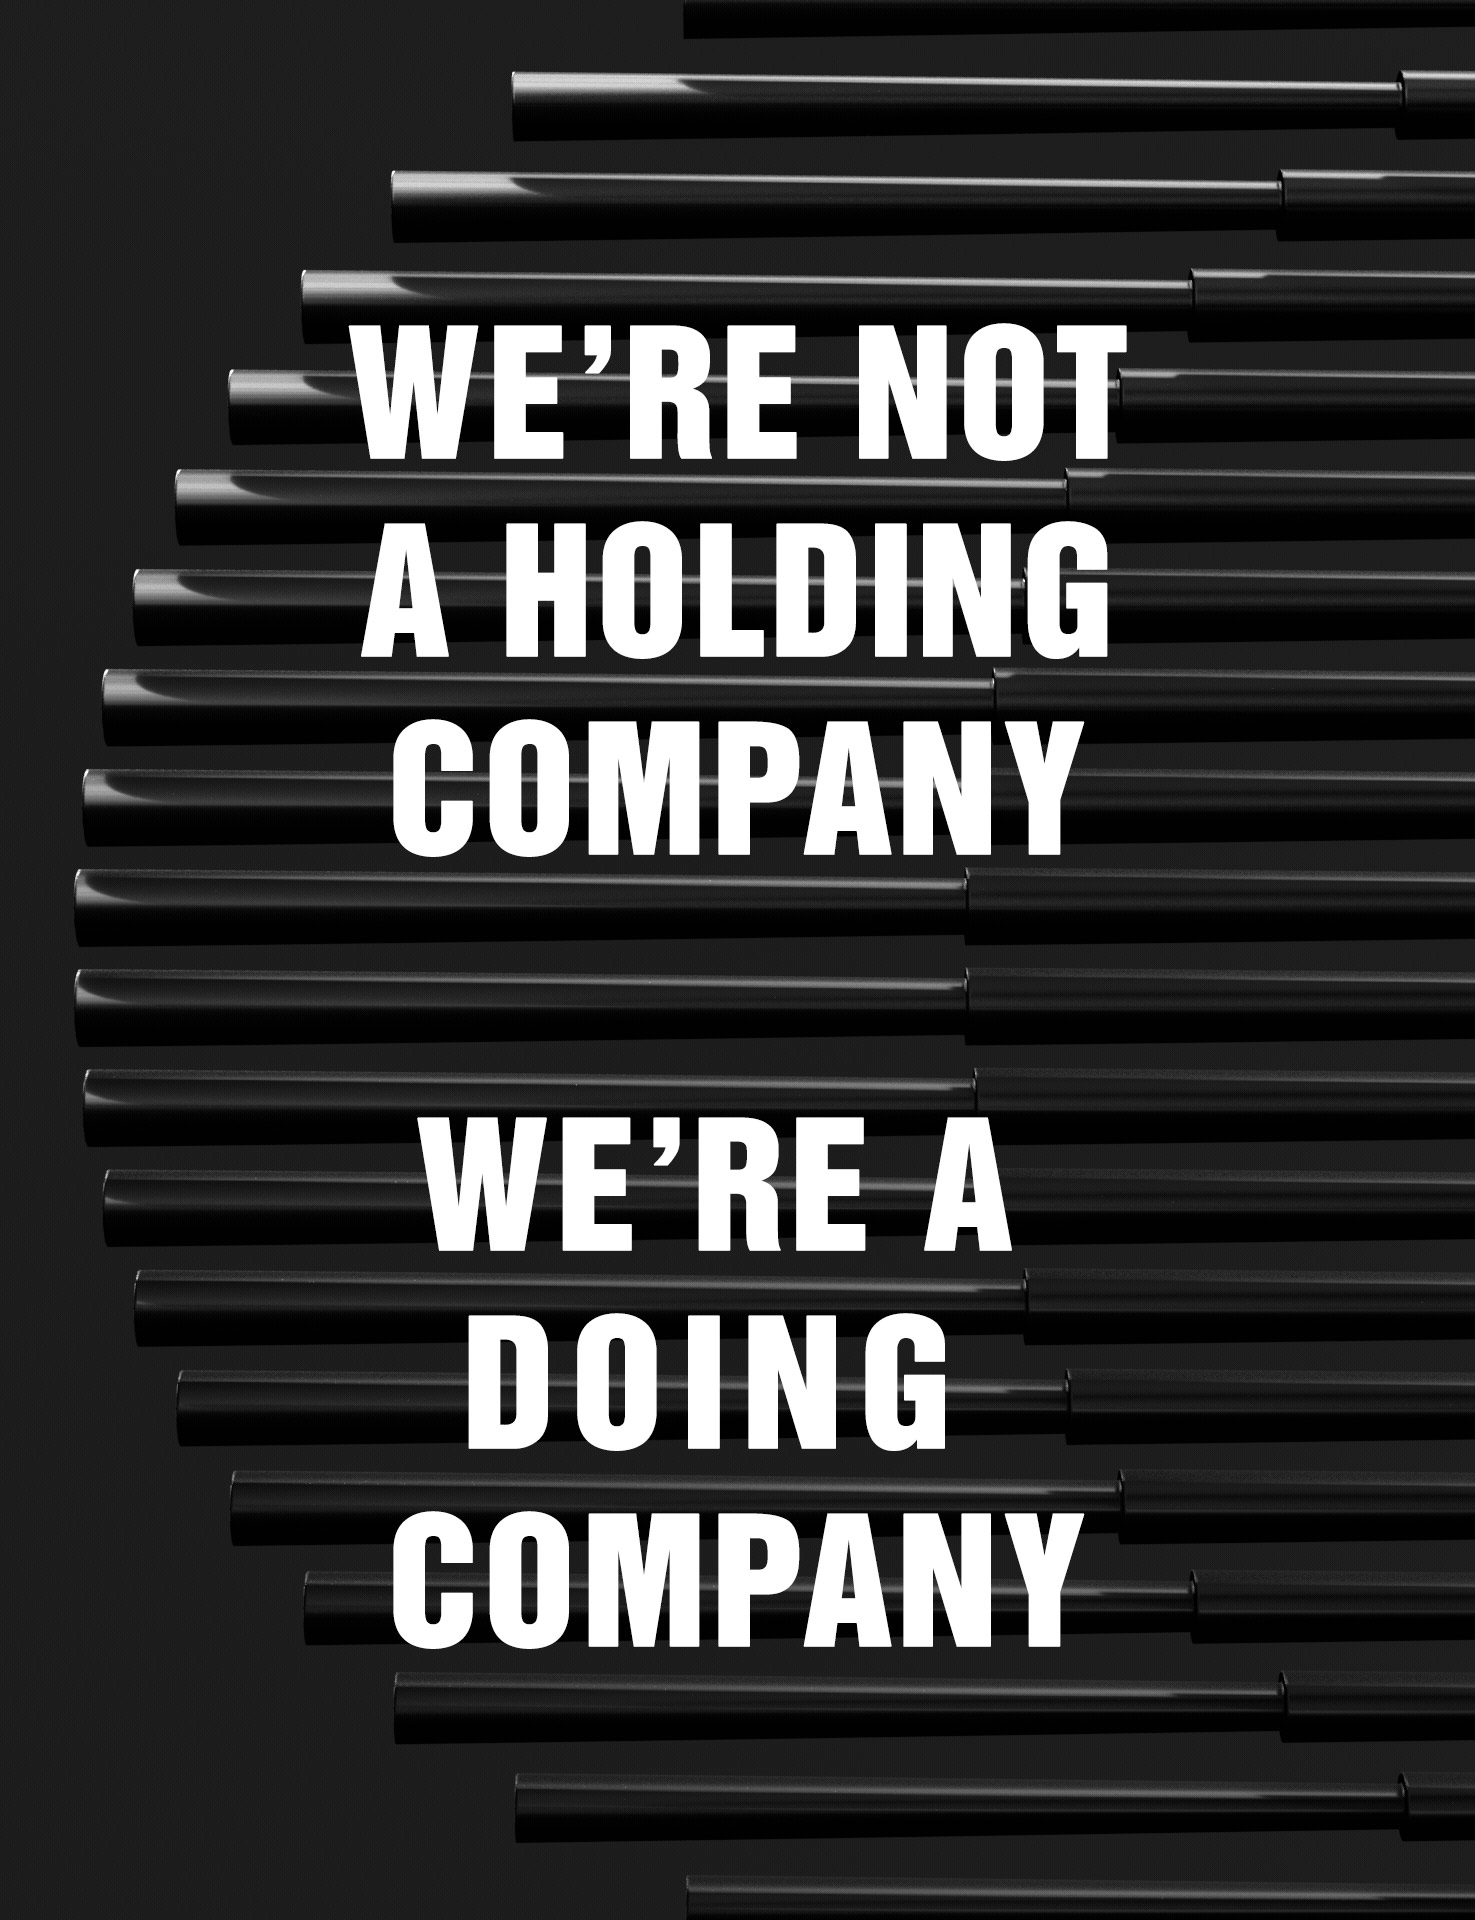 We're not a holding company. We're a doing company.